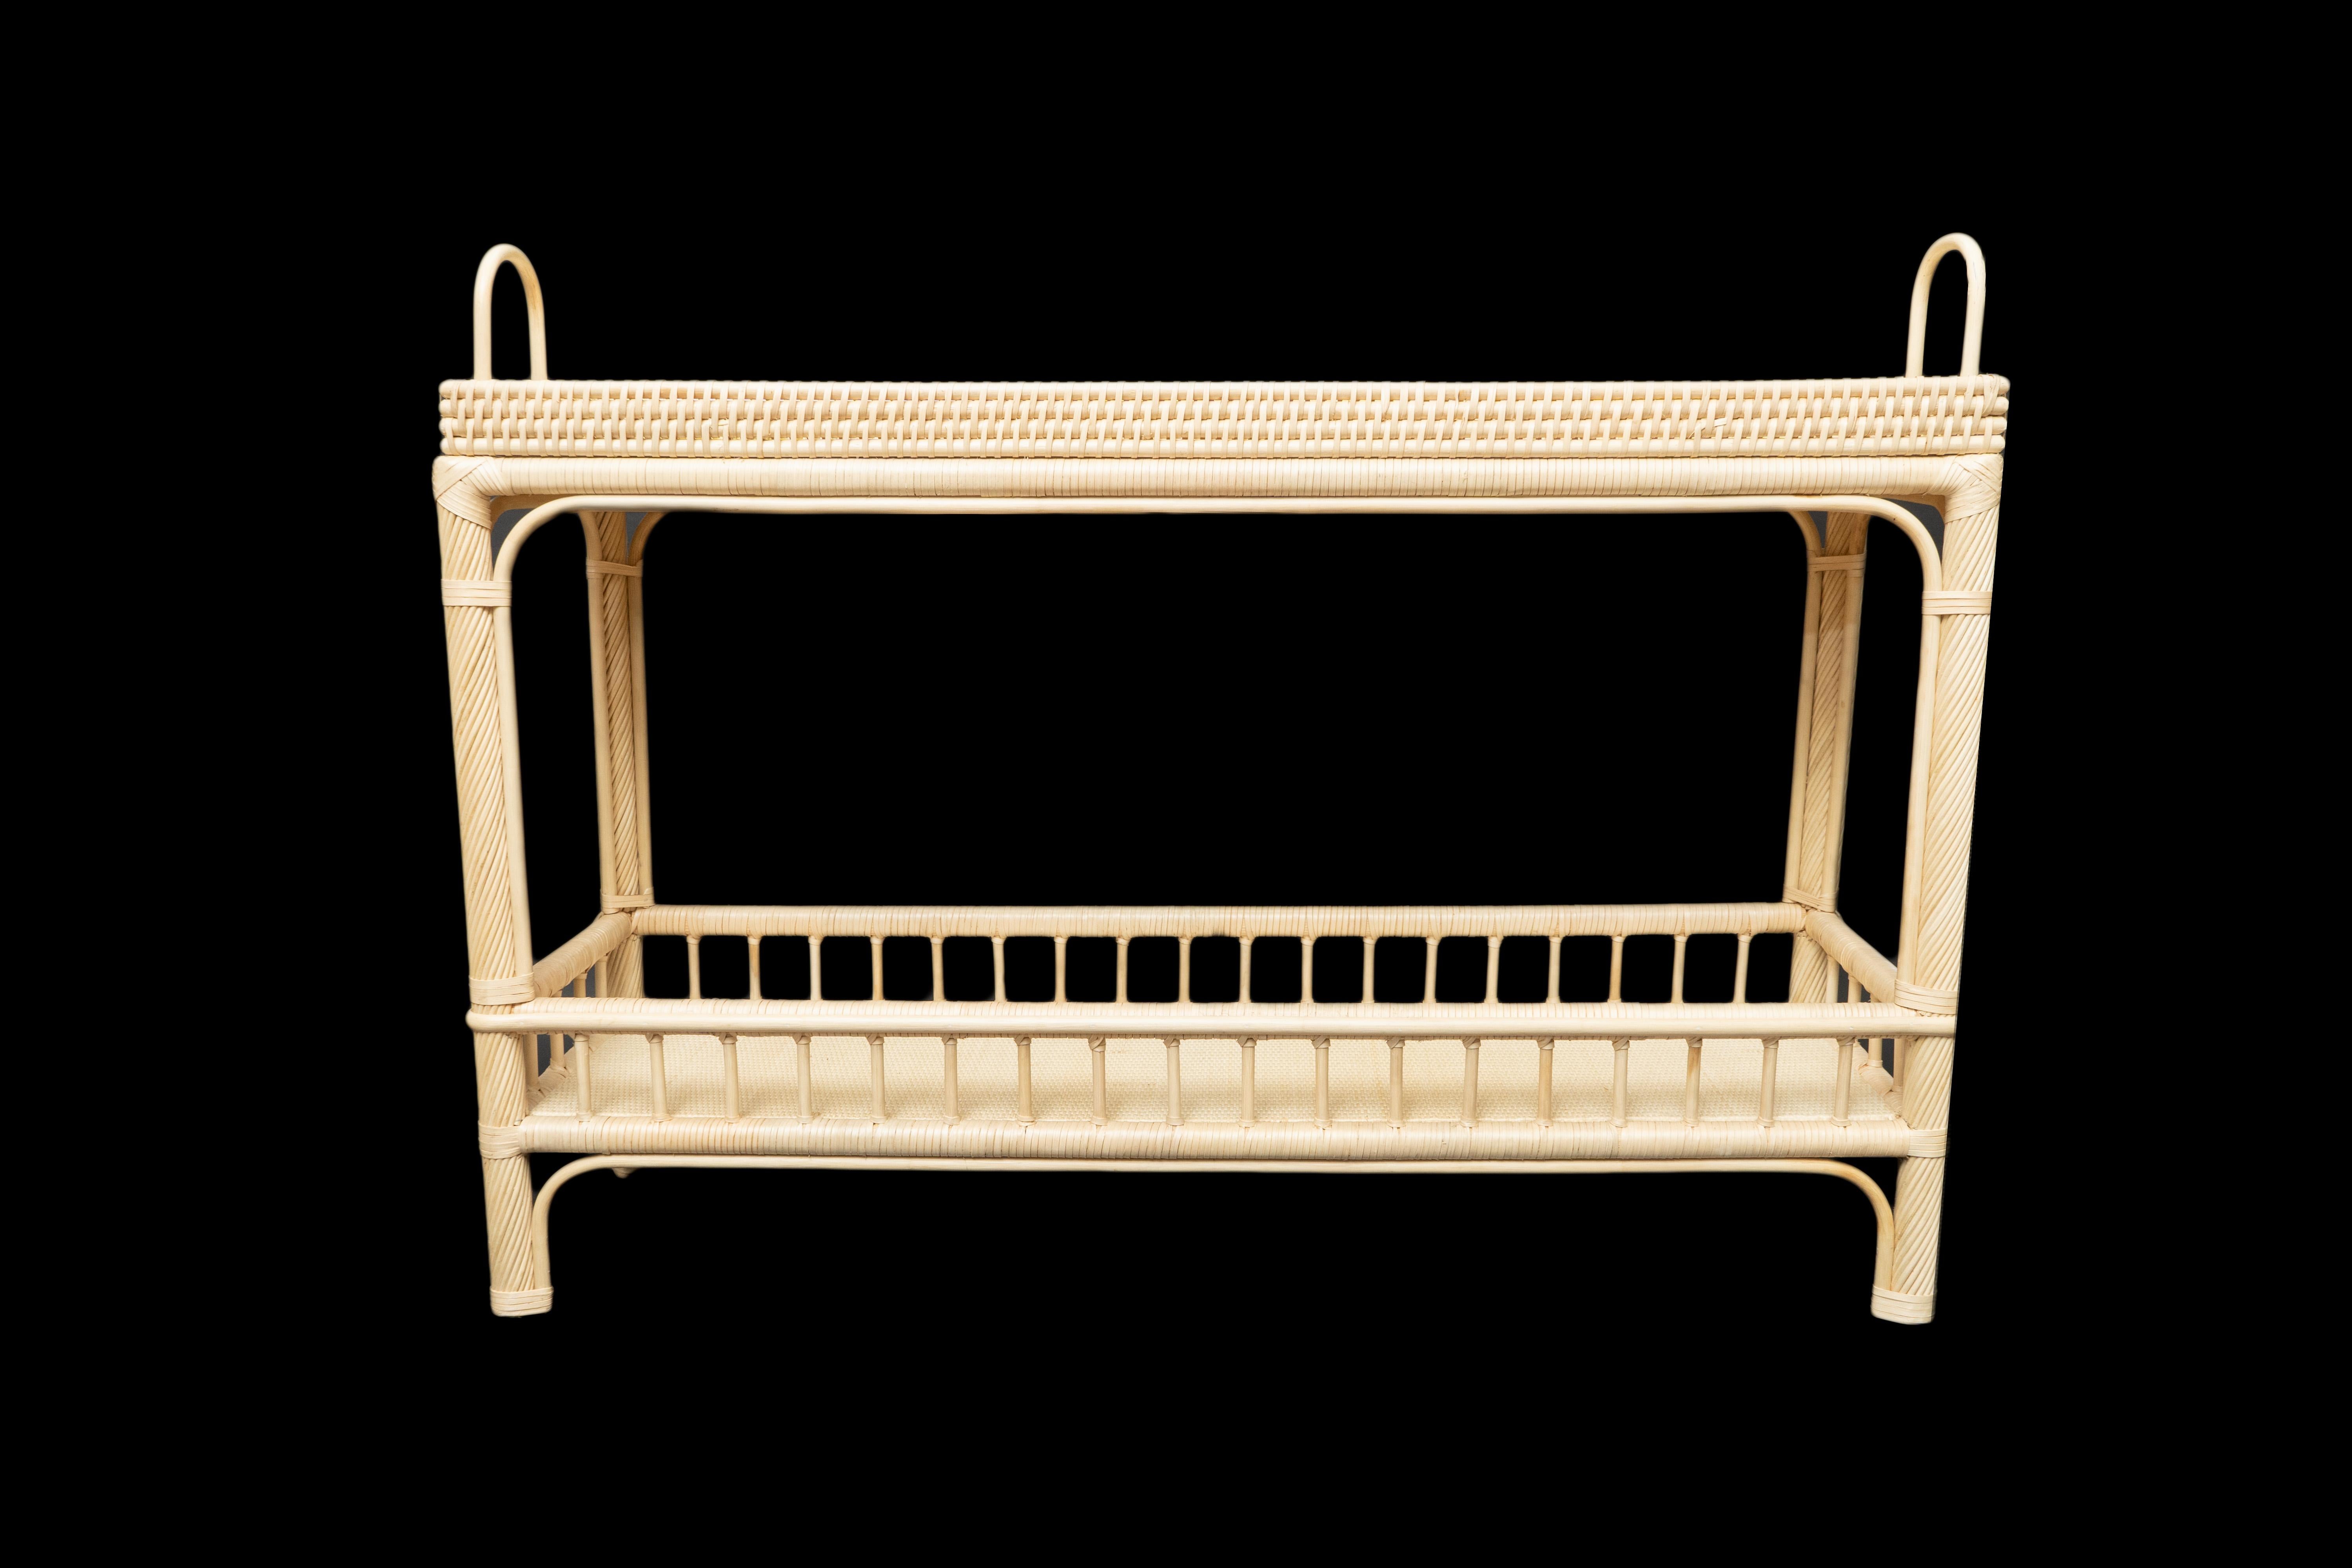 Rattan natural console: Made exclusively for Creel and Gow in Morocco.

Measures: 55